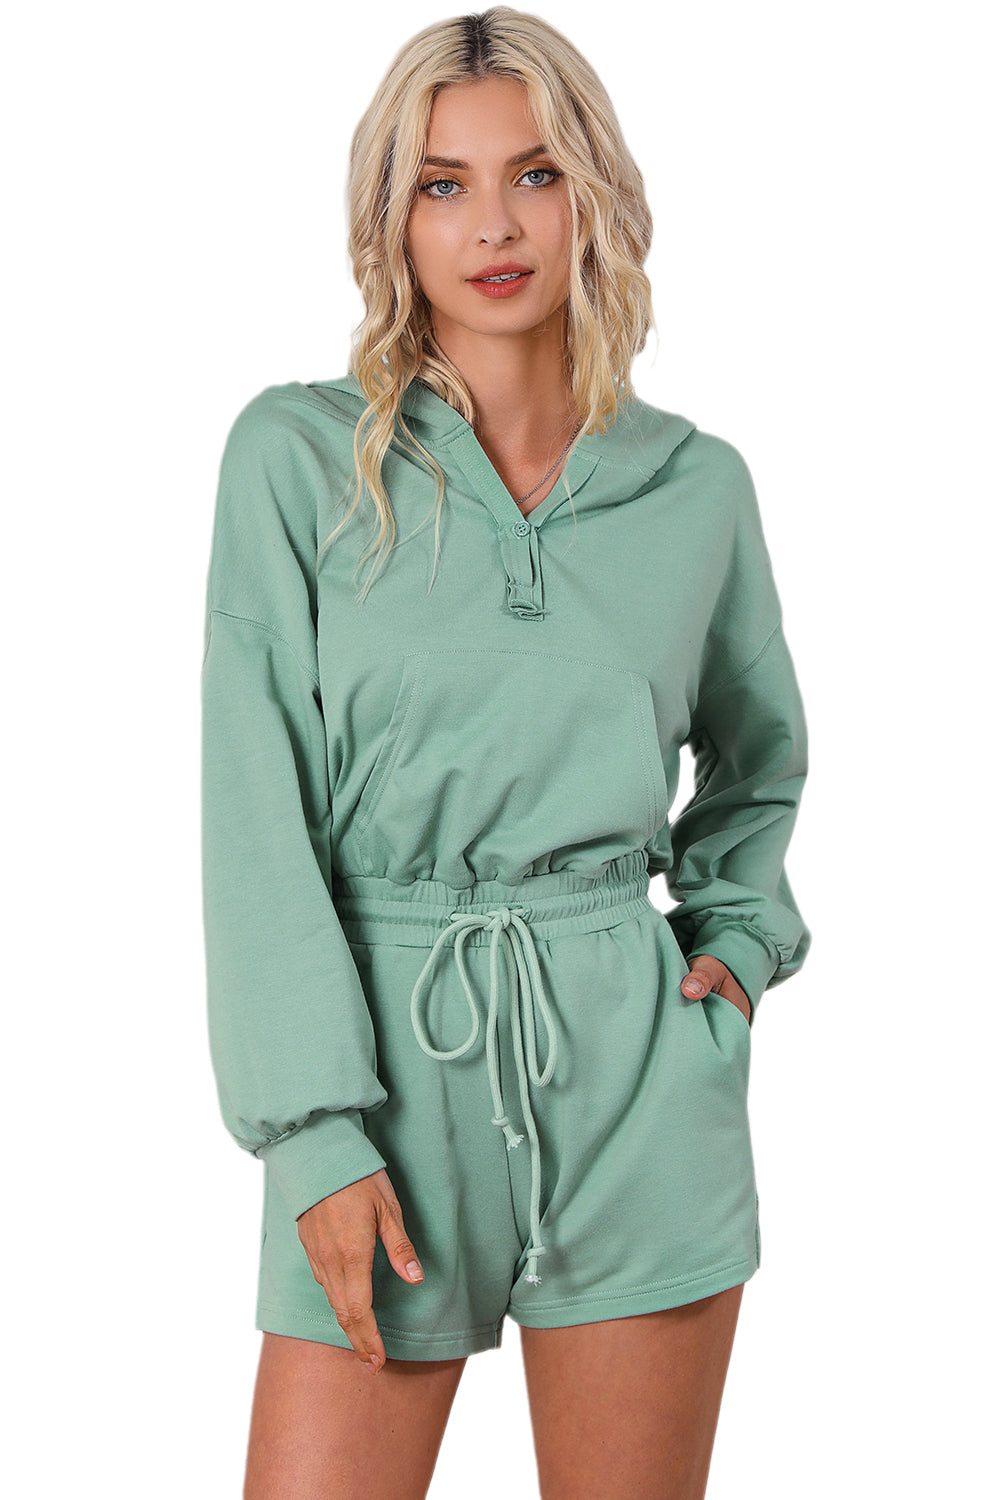 Cali Chic Blue French Terry Hoodie Romper